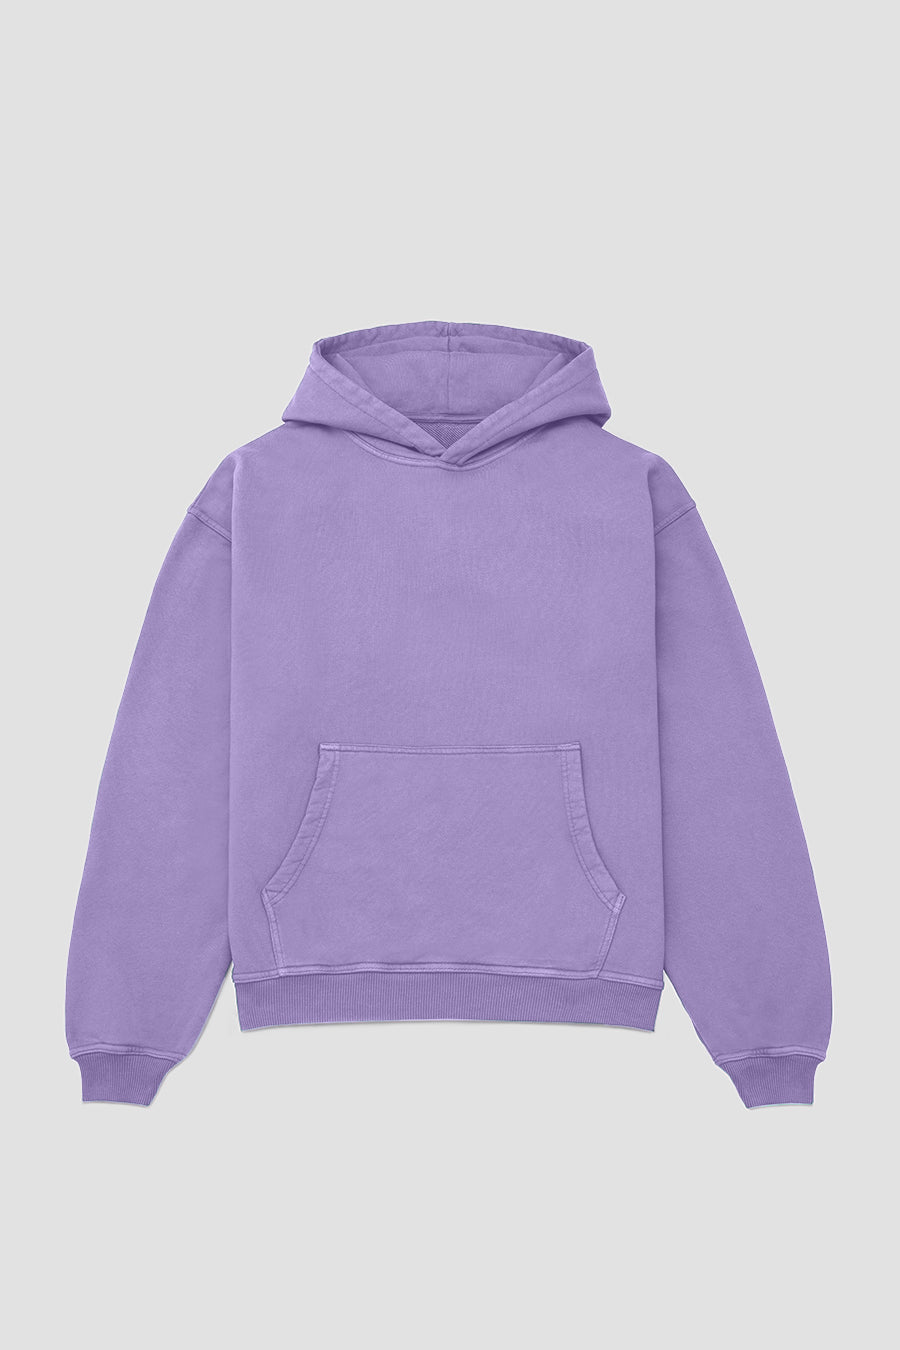 Purple Hoodie - only available in wholesale